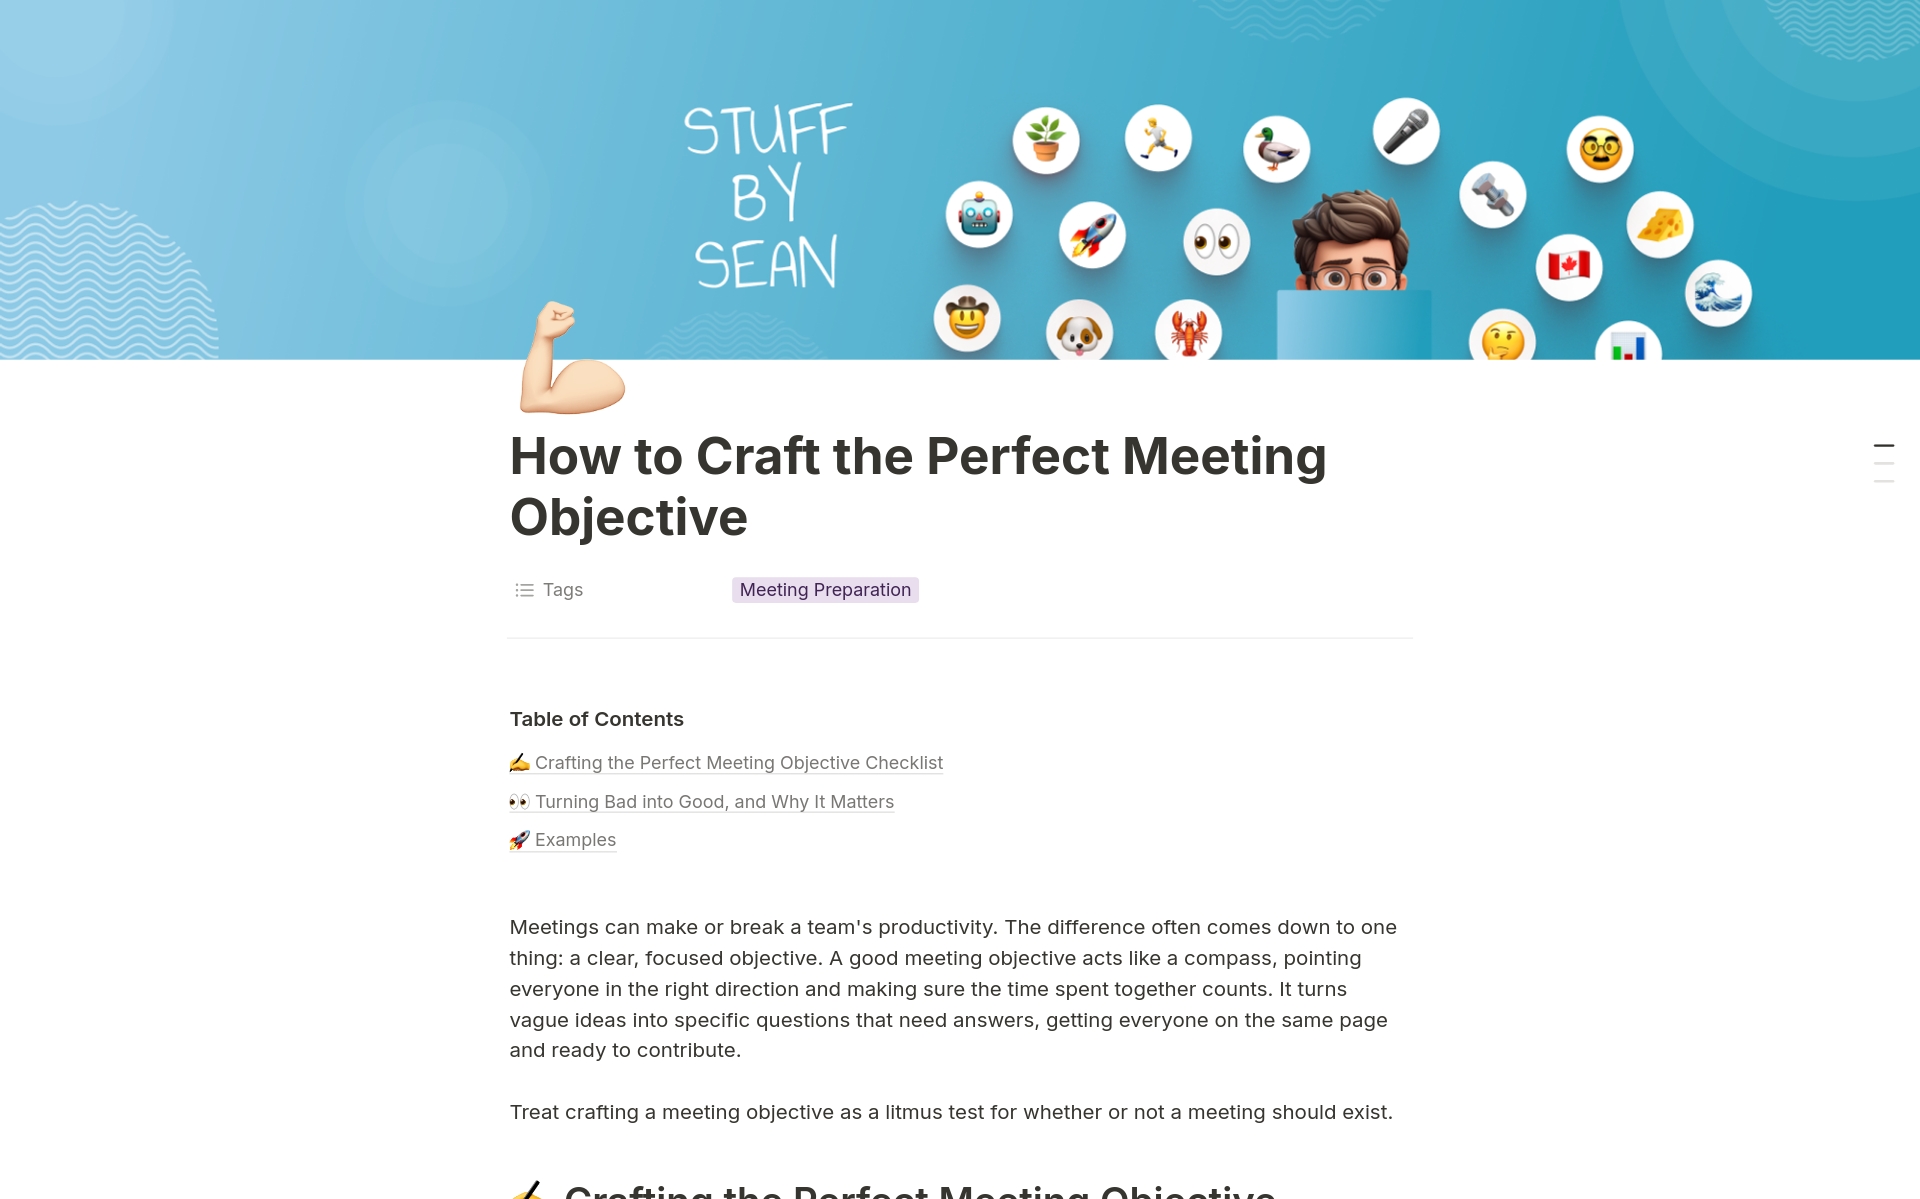 Master the art of meeting productivity with a perfect meeting objective! Transform vague agendas into actionable, specific goals that align with business objectives and drive results.